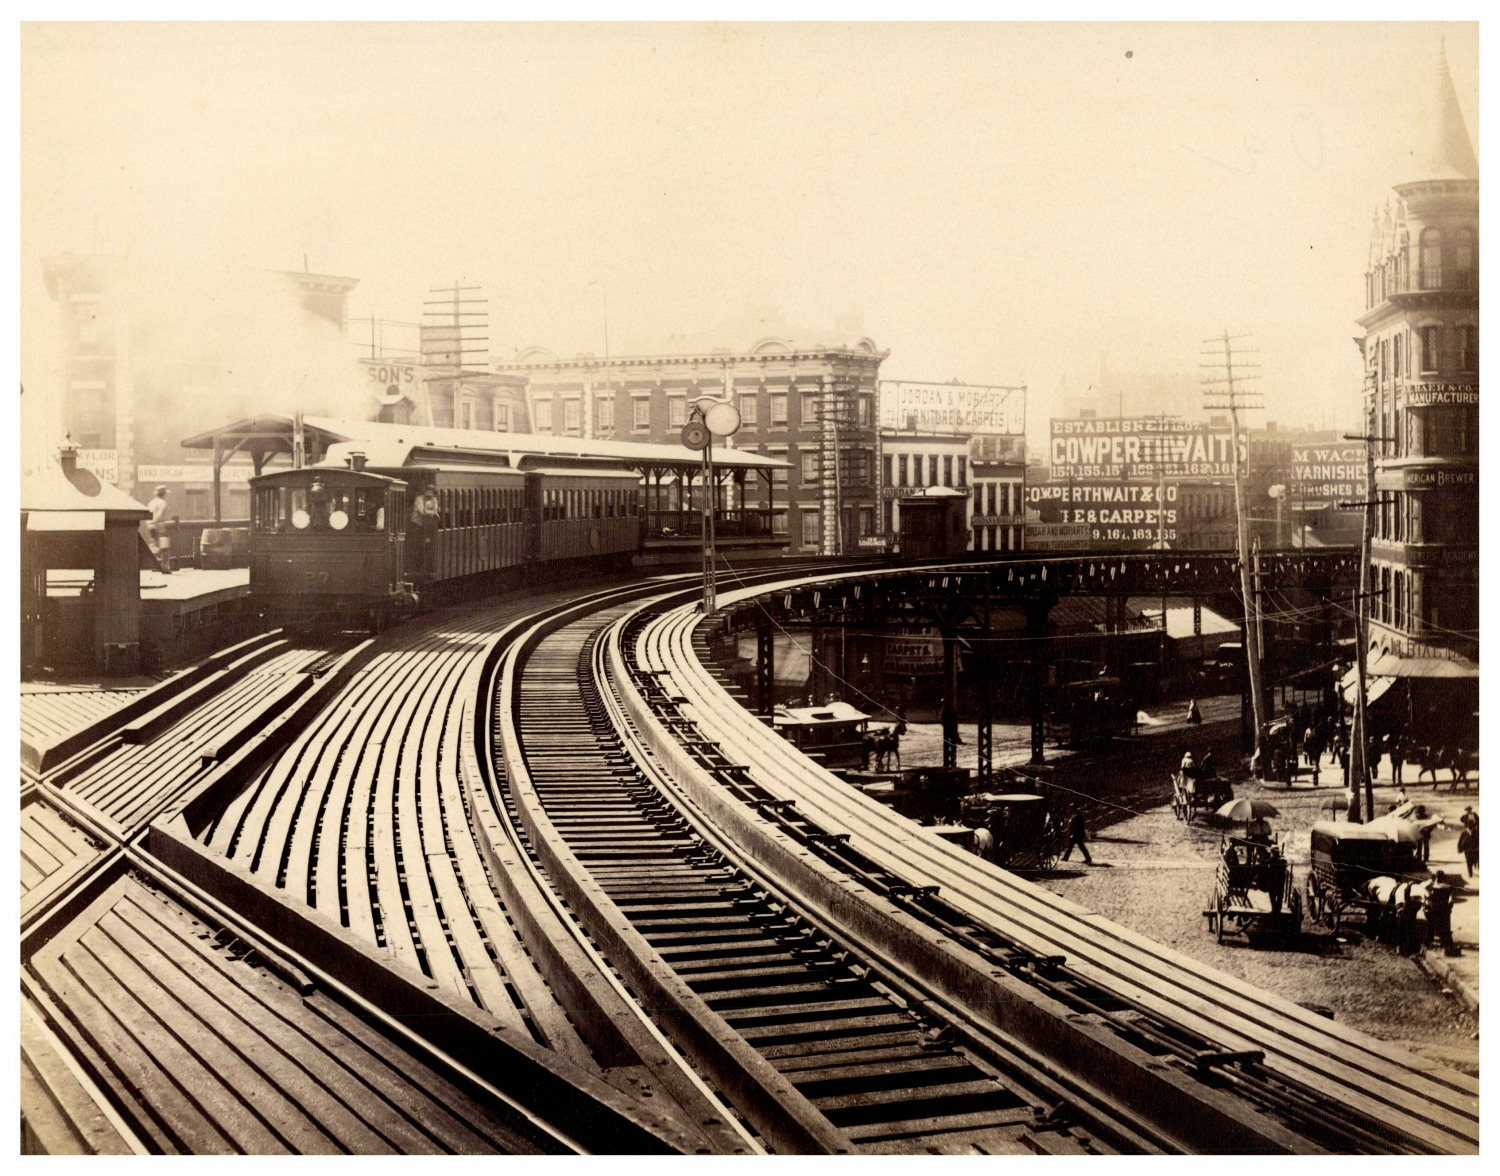 New York, Vintage Elevated Railway Print, Albuminated Print 17x21.5 Approx.